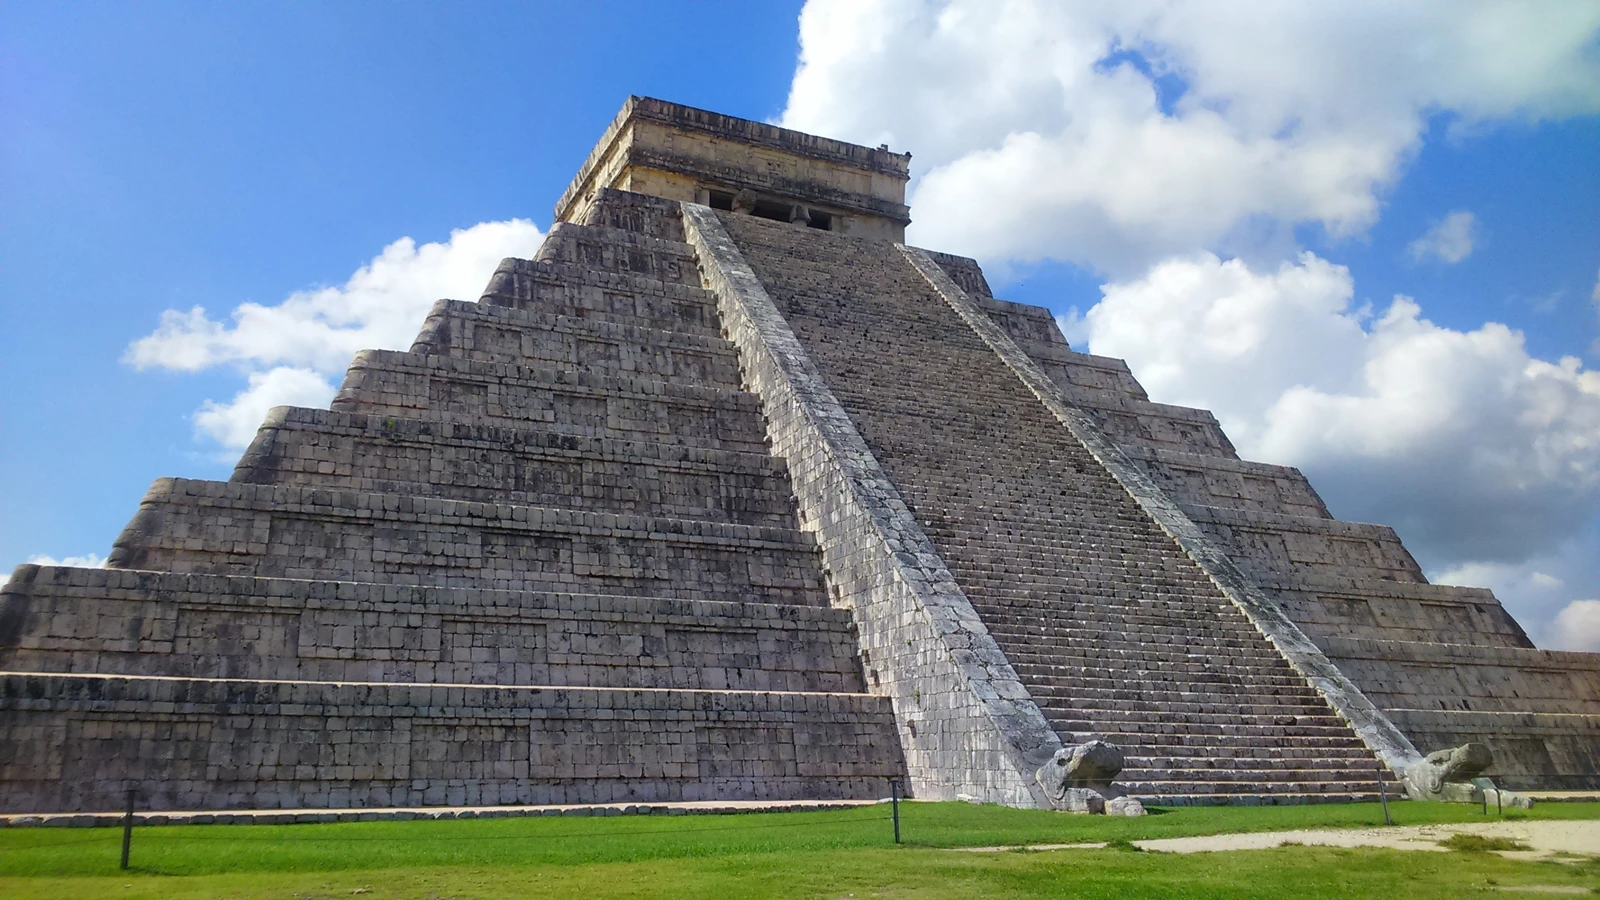 The large Mayan pyramid of Chichen Itza in Mexico on a sunny day